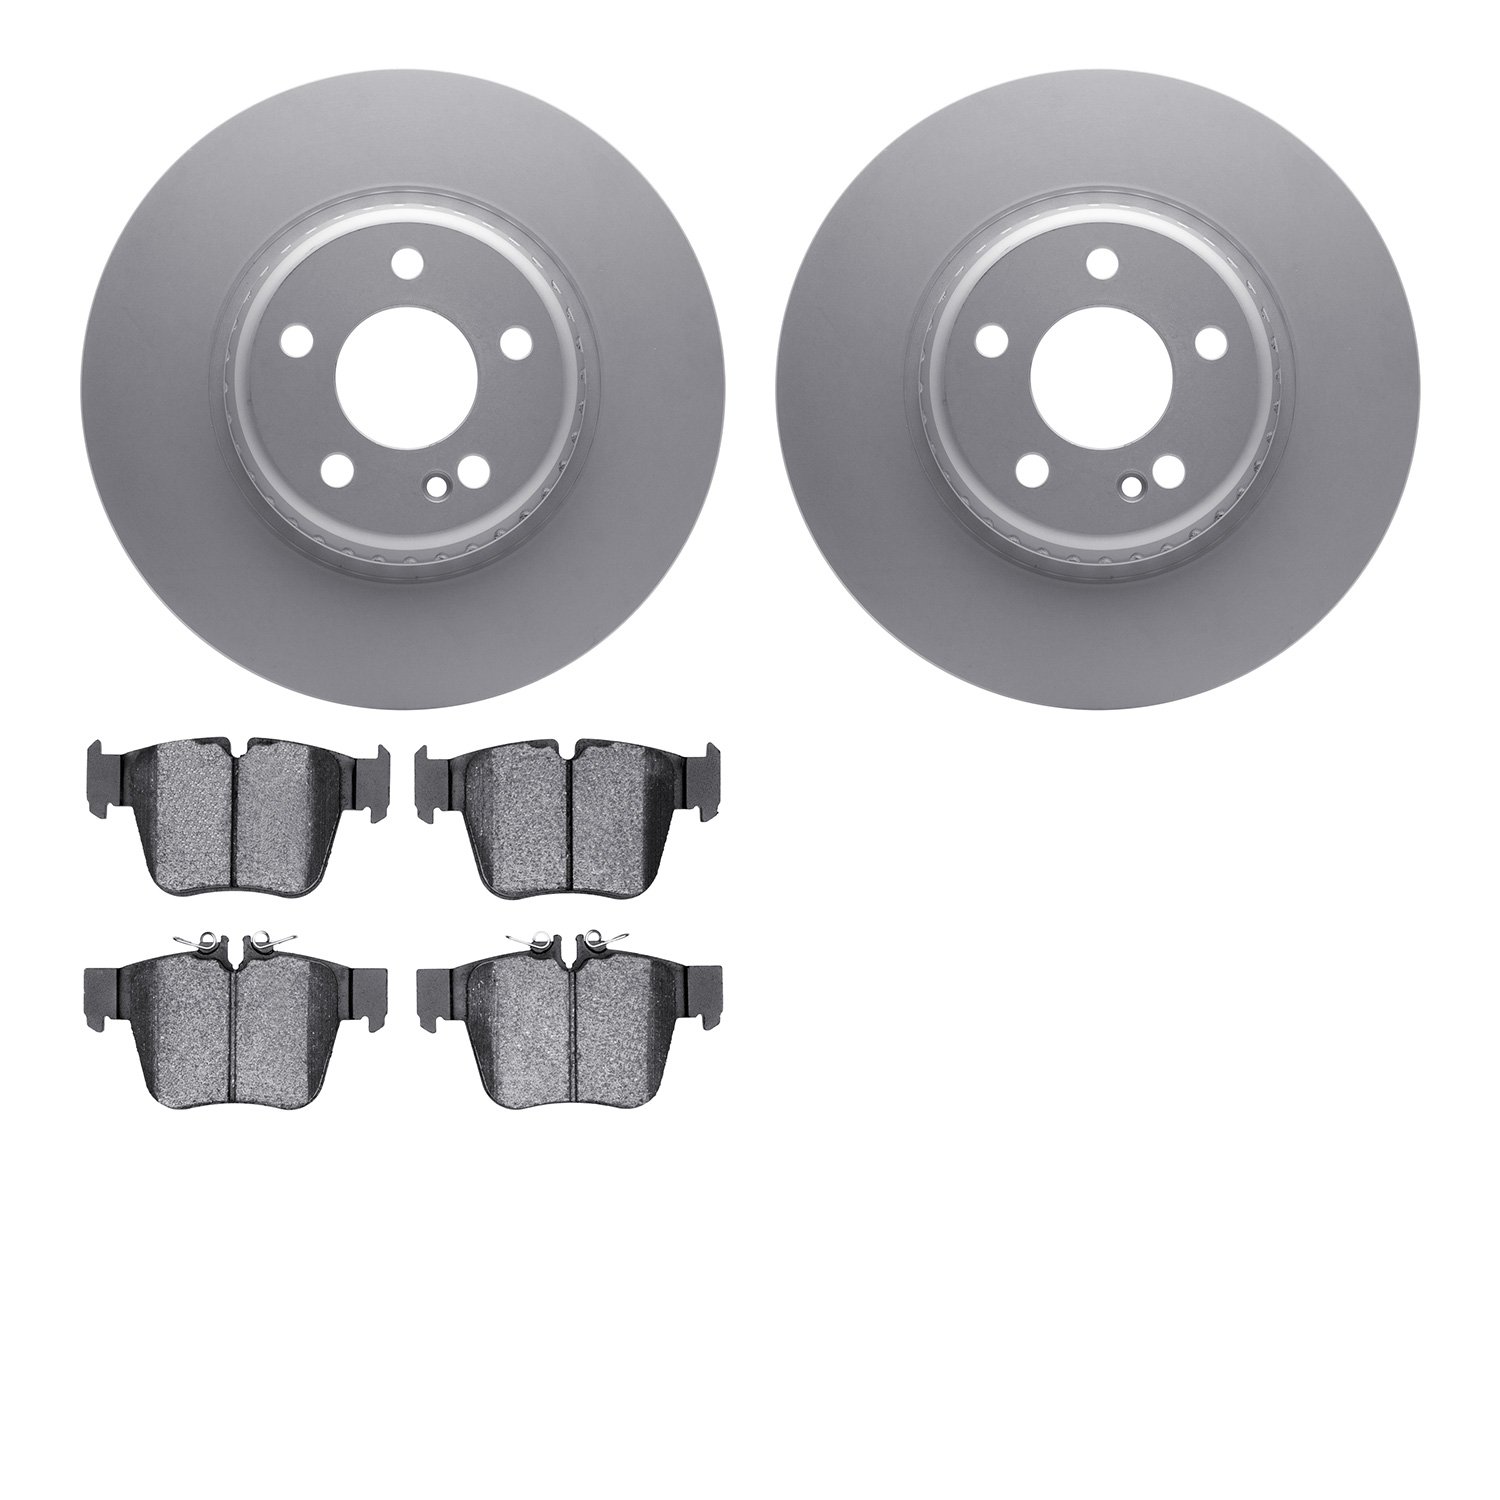 4302-63083 Geospec Brake Rotors with 3000-Series Ceramic Brake Pads Kit, Fits Select Mercedes-Benz, Position: Rear